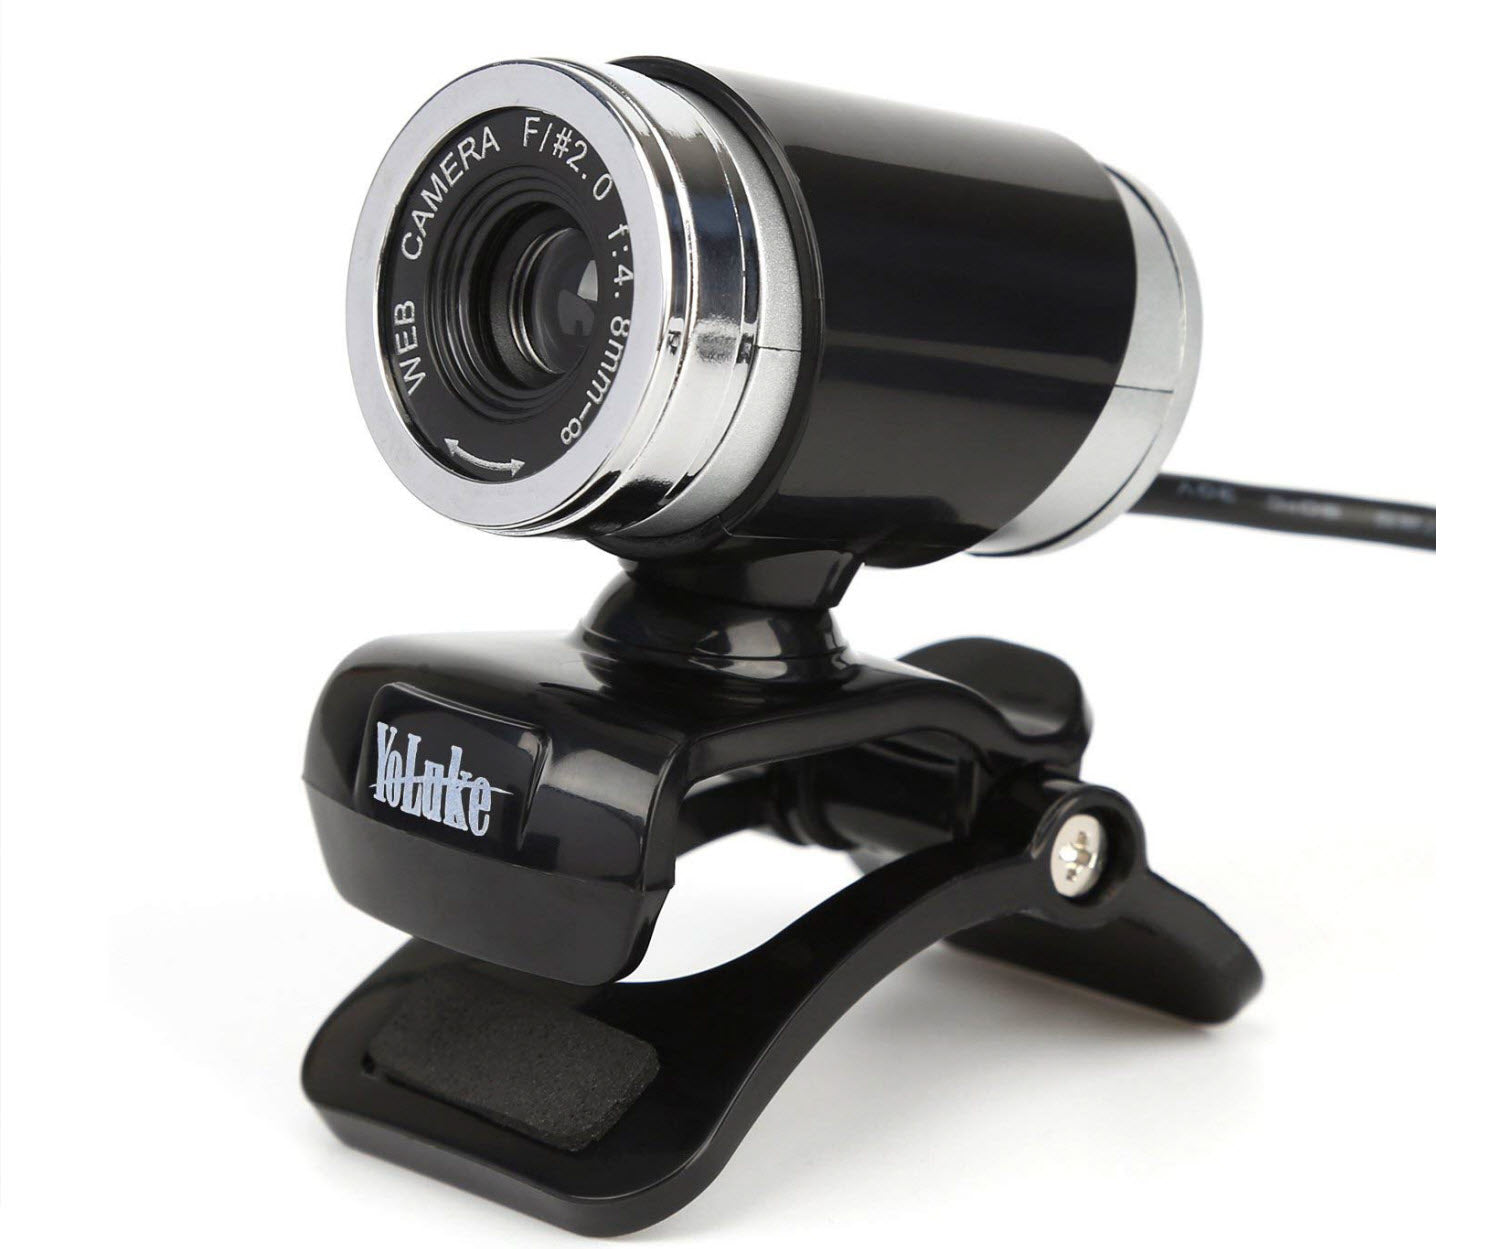 USB Webcam Video HD Web Camera with Built-in Sound Absorption Microphone